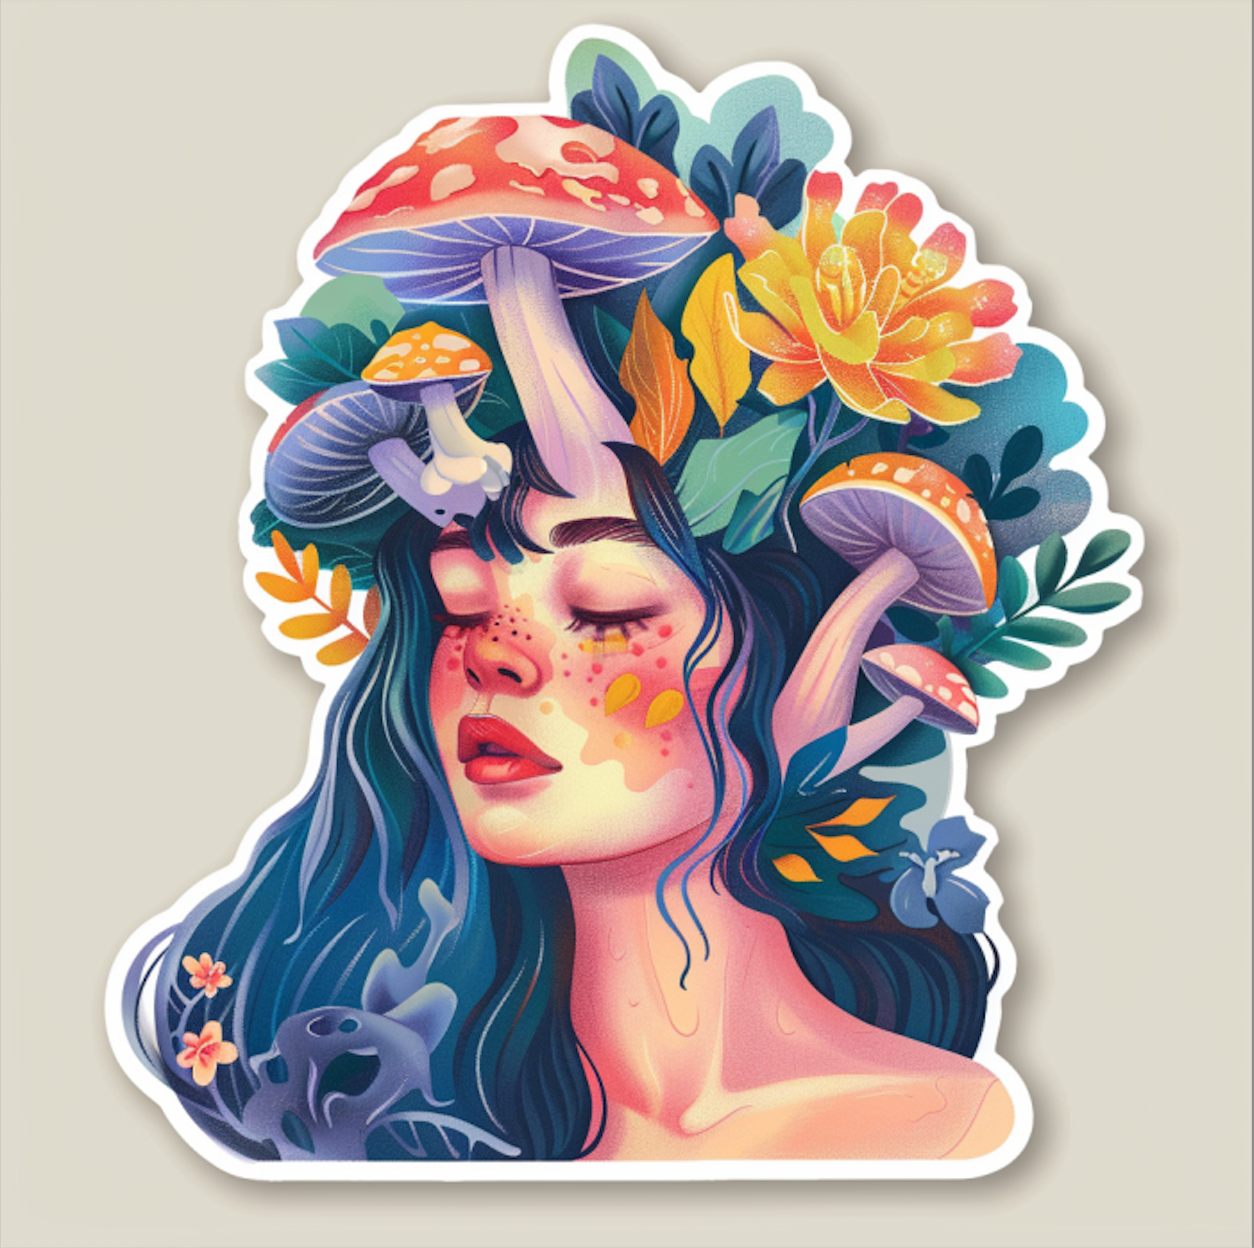 Drawing of a girl that is connected to nature after using natural ingredients, with mushrooms and plants